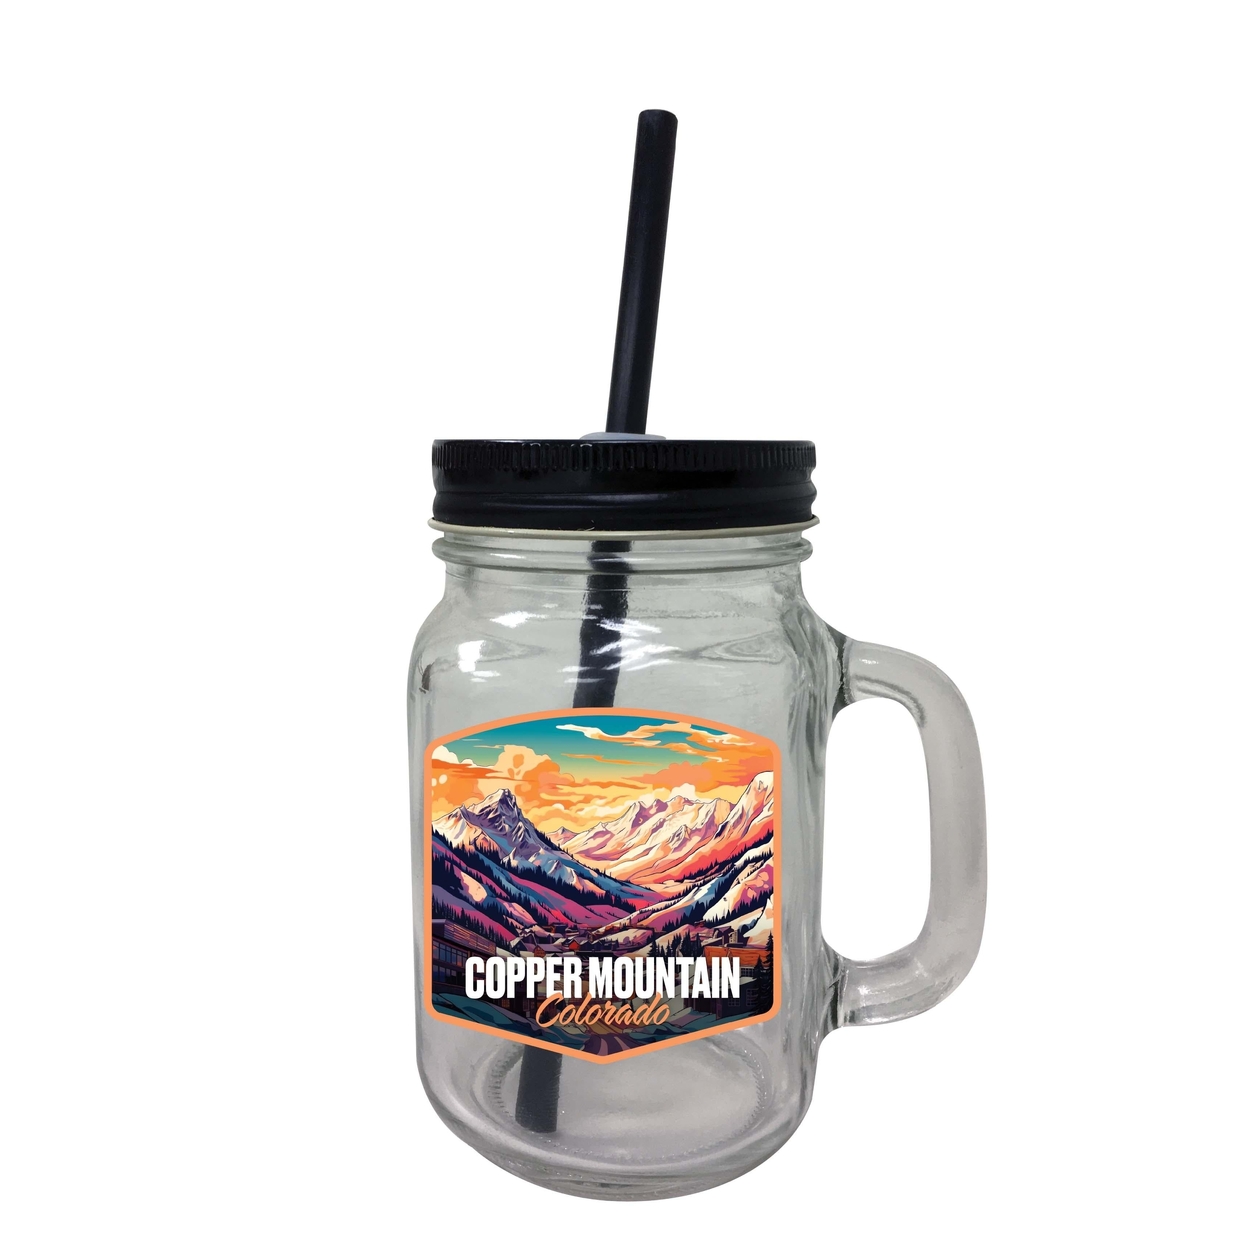 Copper Mountain A Souvenir Mason Jar With Lid And Straw - 4-Pack